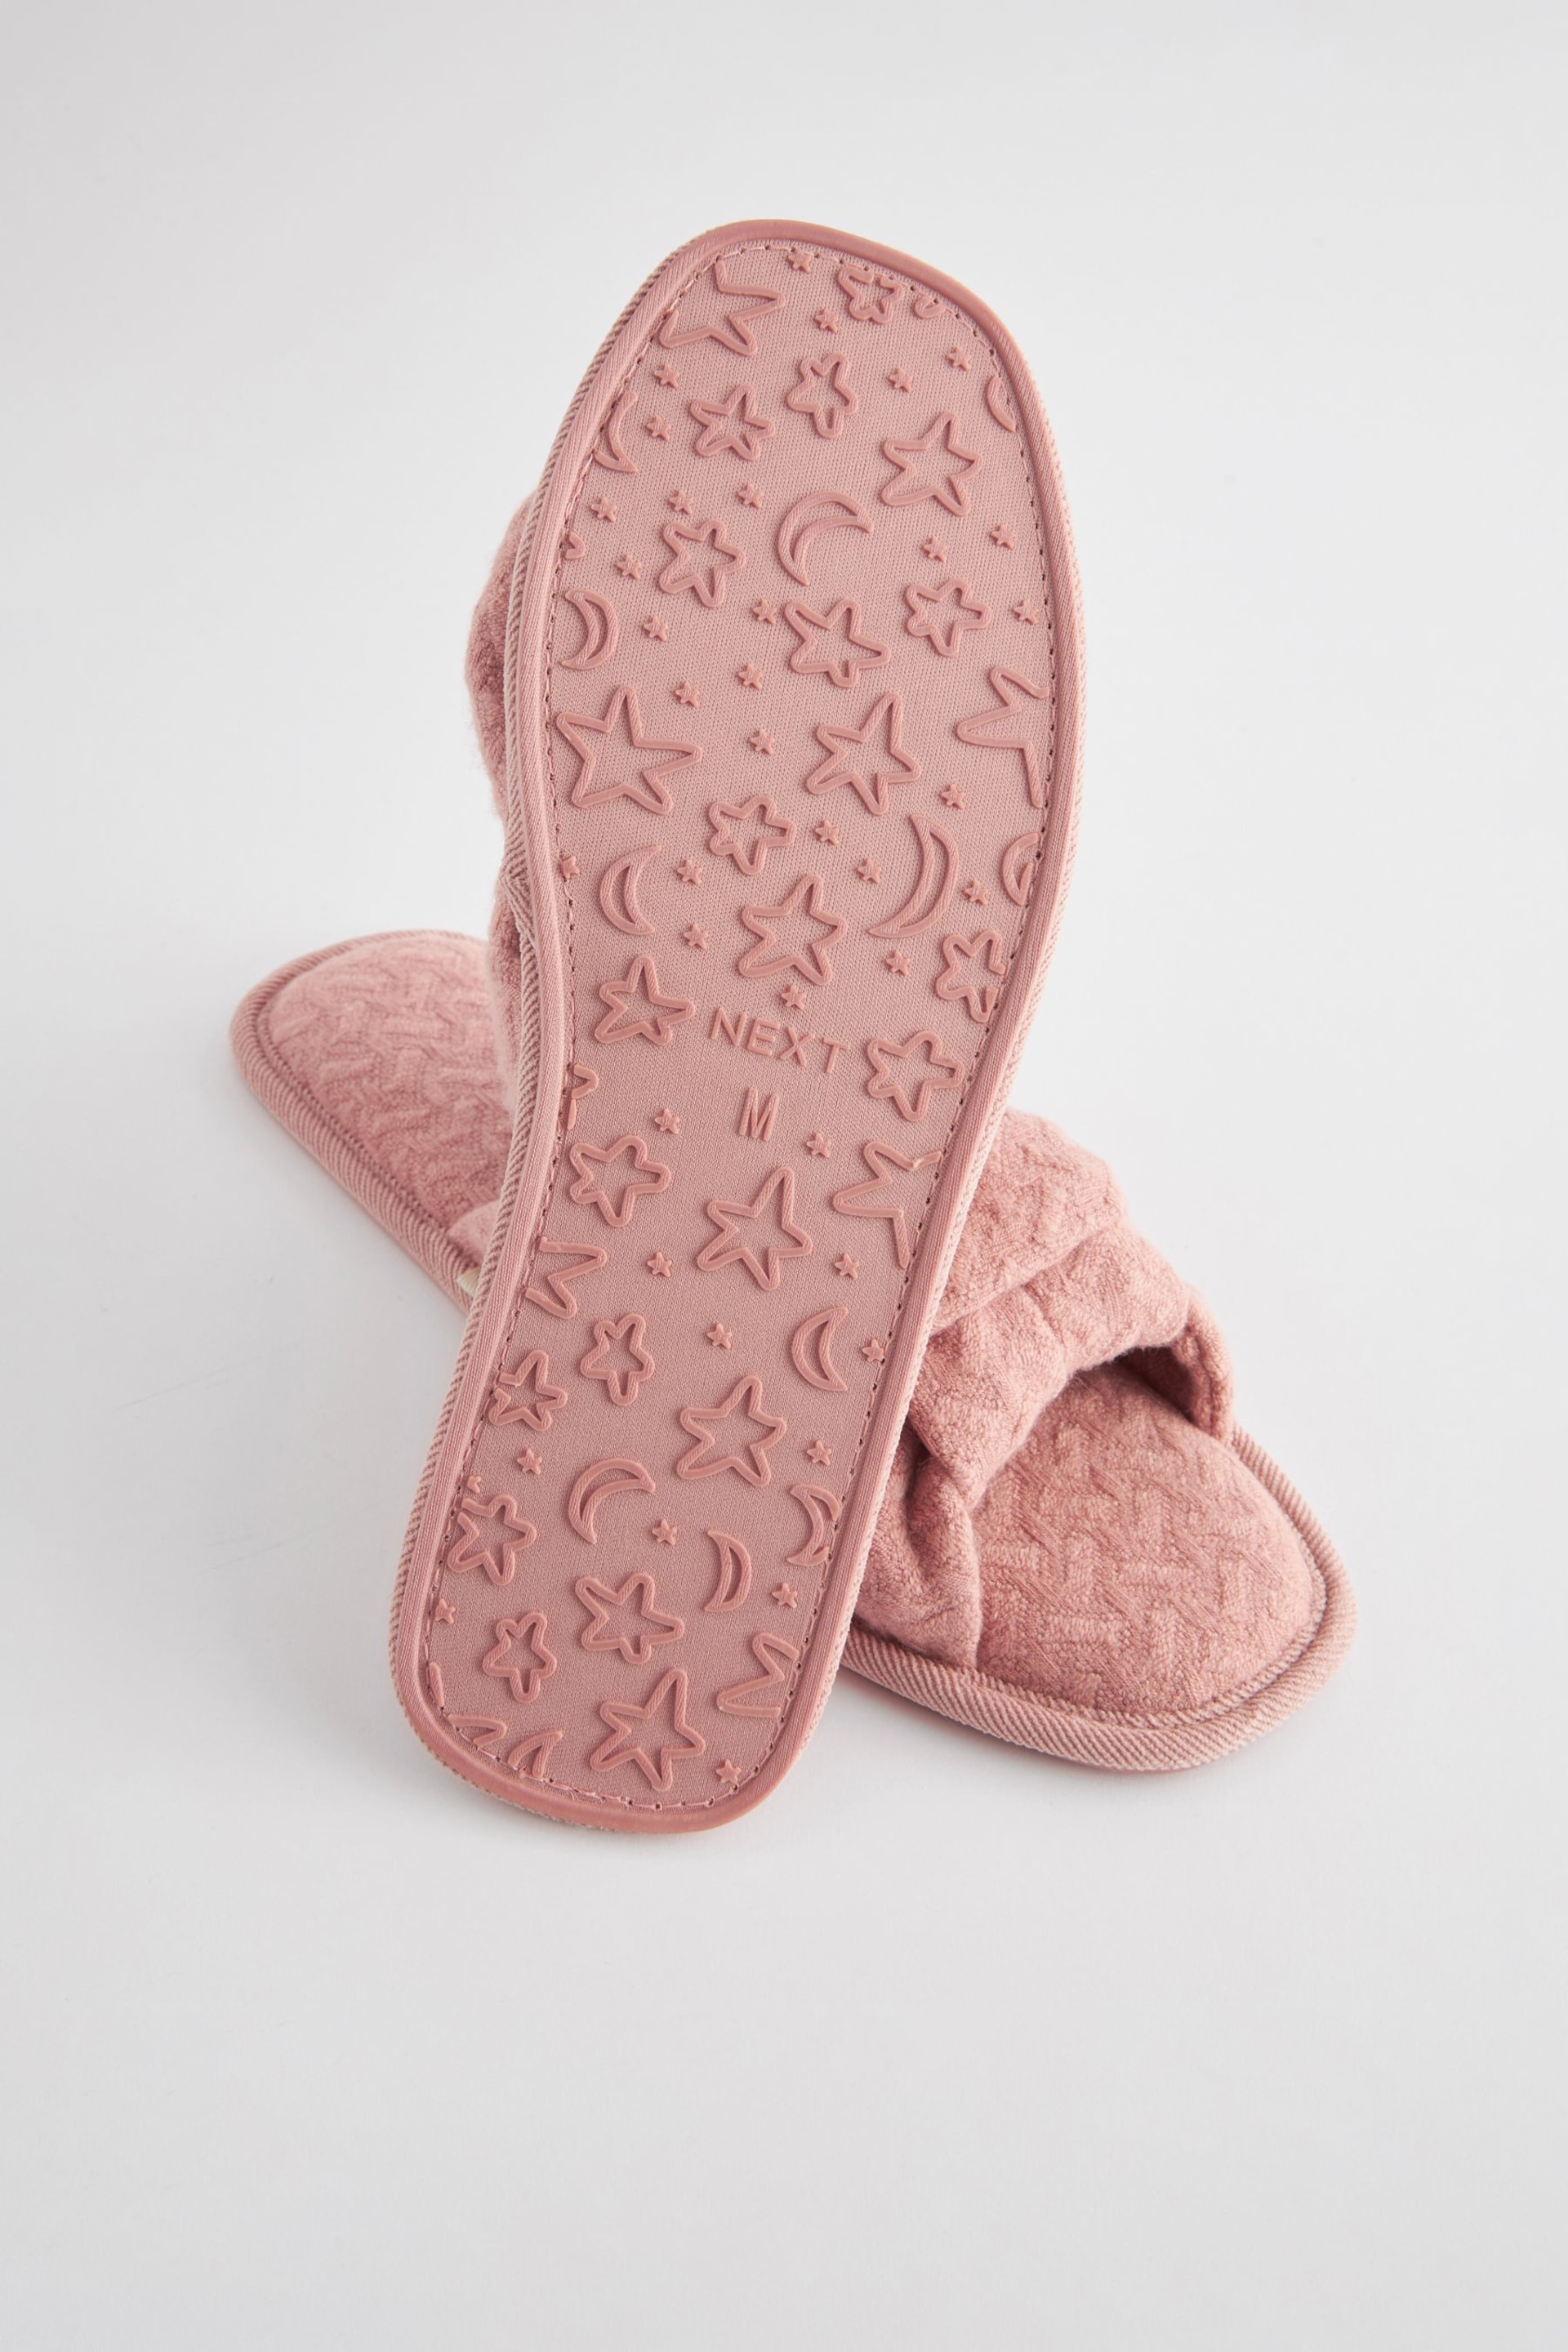 Pink Knot Textured Slider Slippers - Image 5 of 6